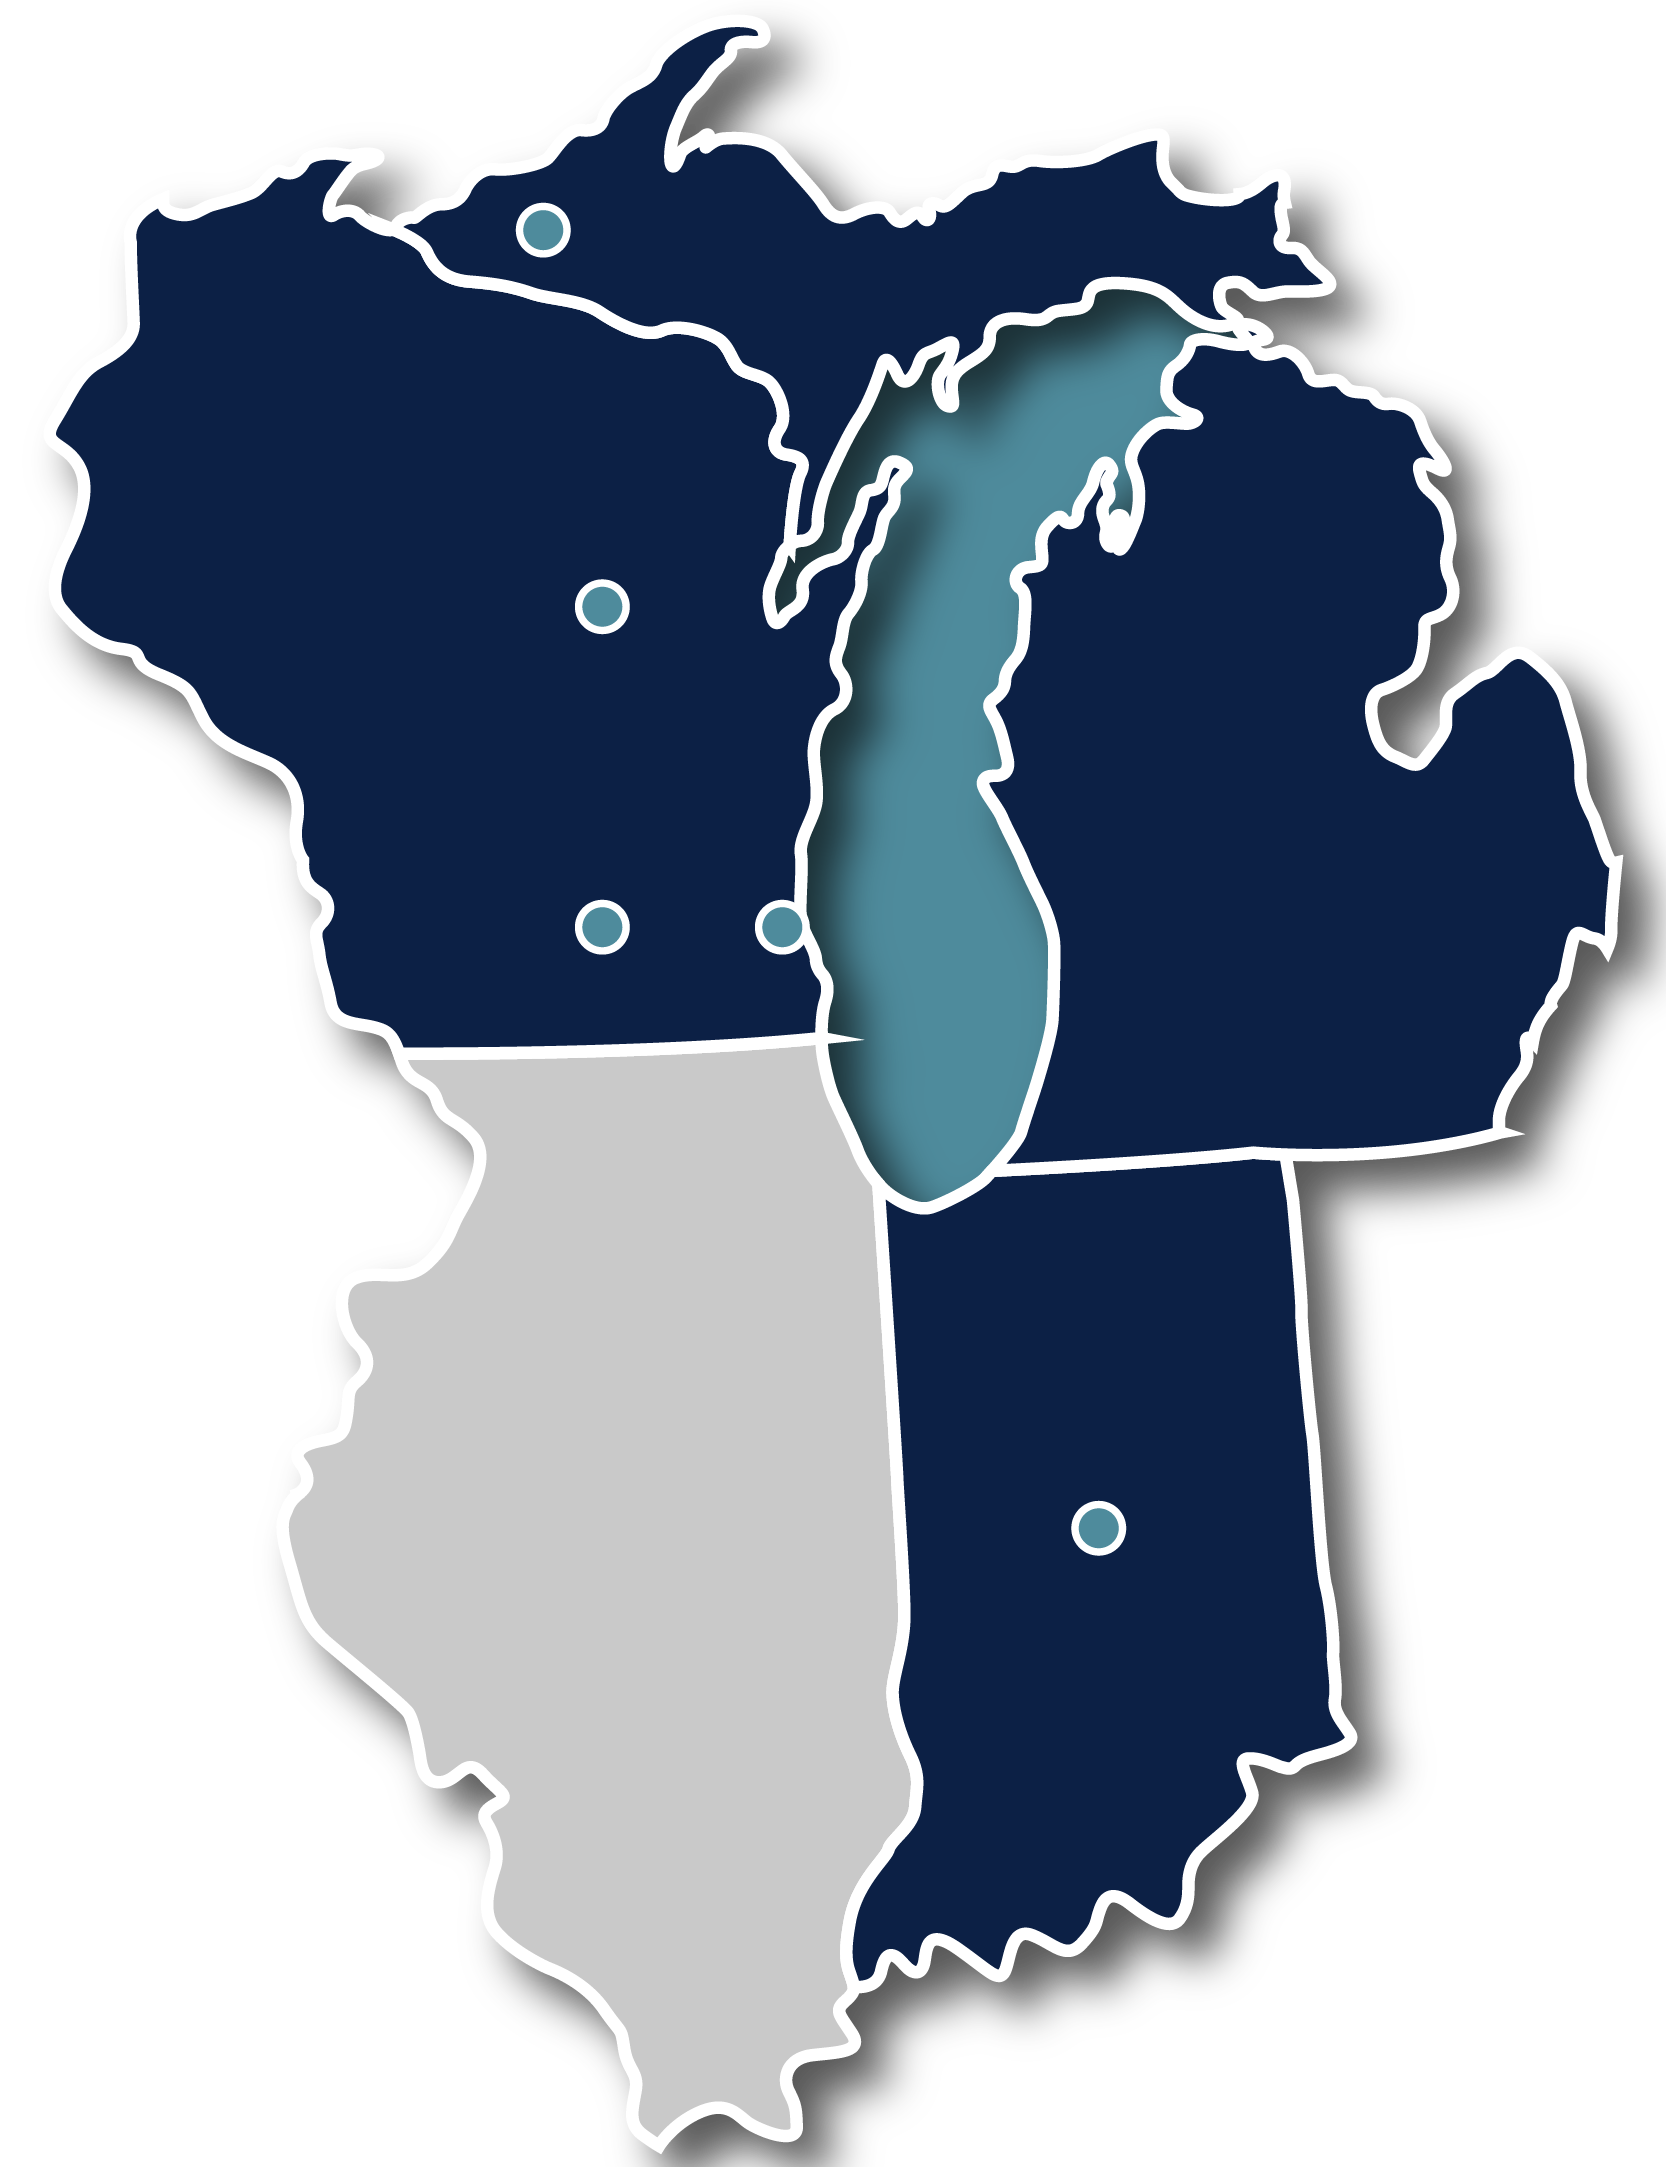 EMCS is a full-service civil engineering firm with offices in Milwaukee, Wausau, and Madison, Wisconsin; Indianapolis, Indiana; and Bergland, Michigan.